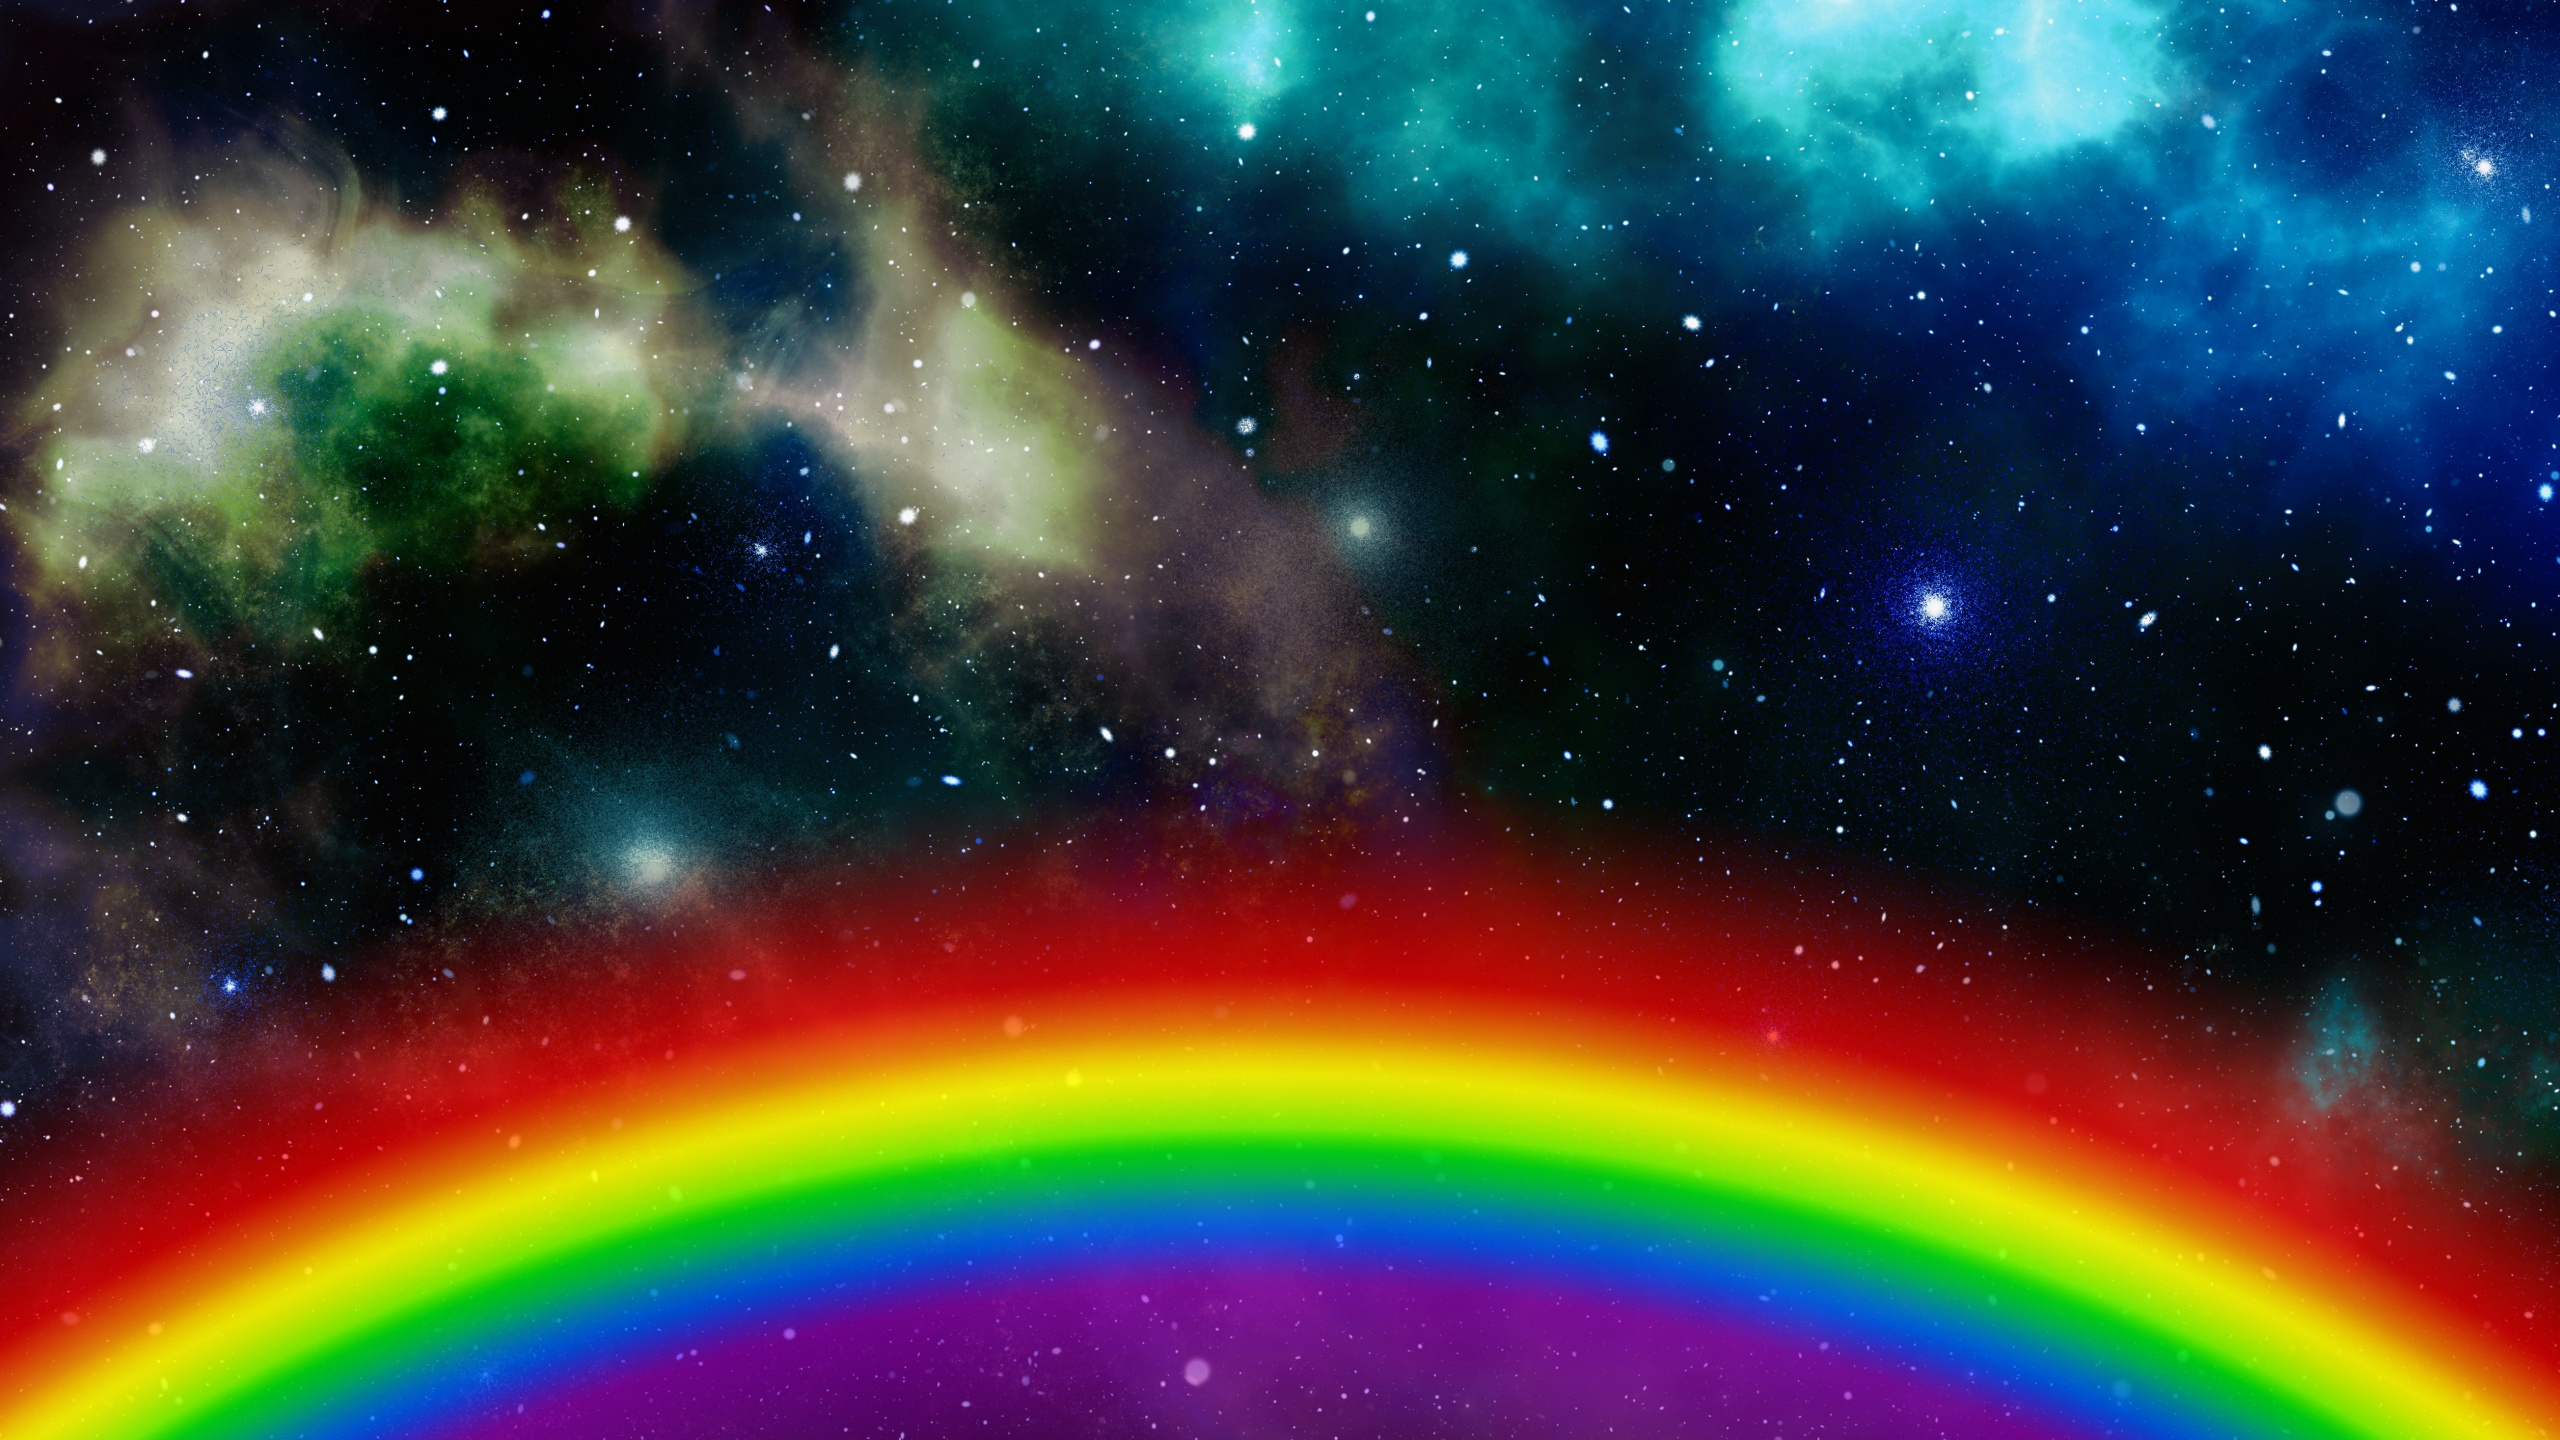 Download Rainbow, colorful, space, clouds, art wallpaper, 2560x Dual Wide, Widescreen 16: Widescreen